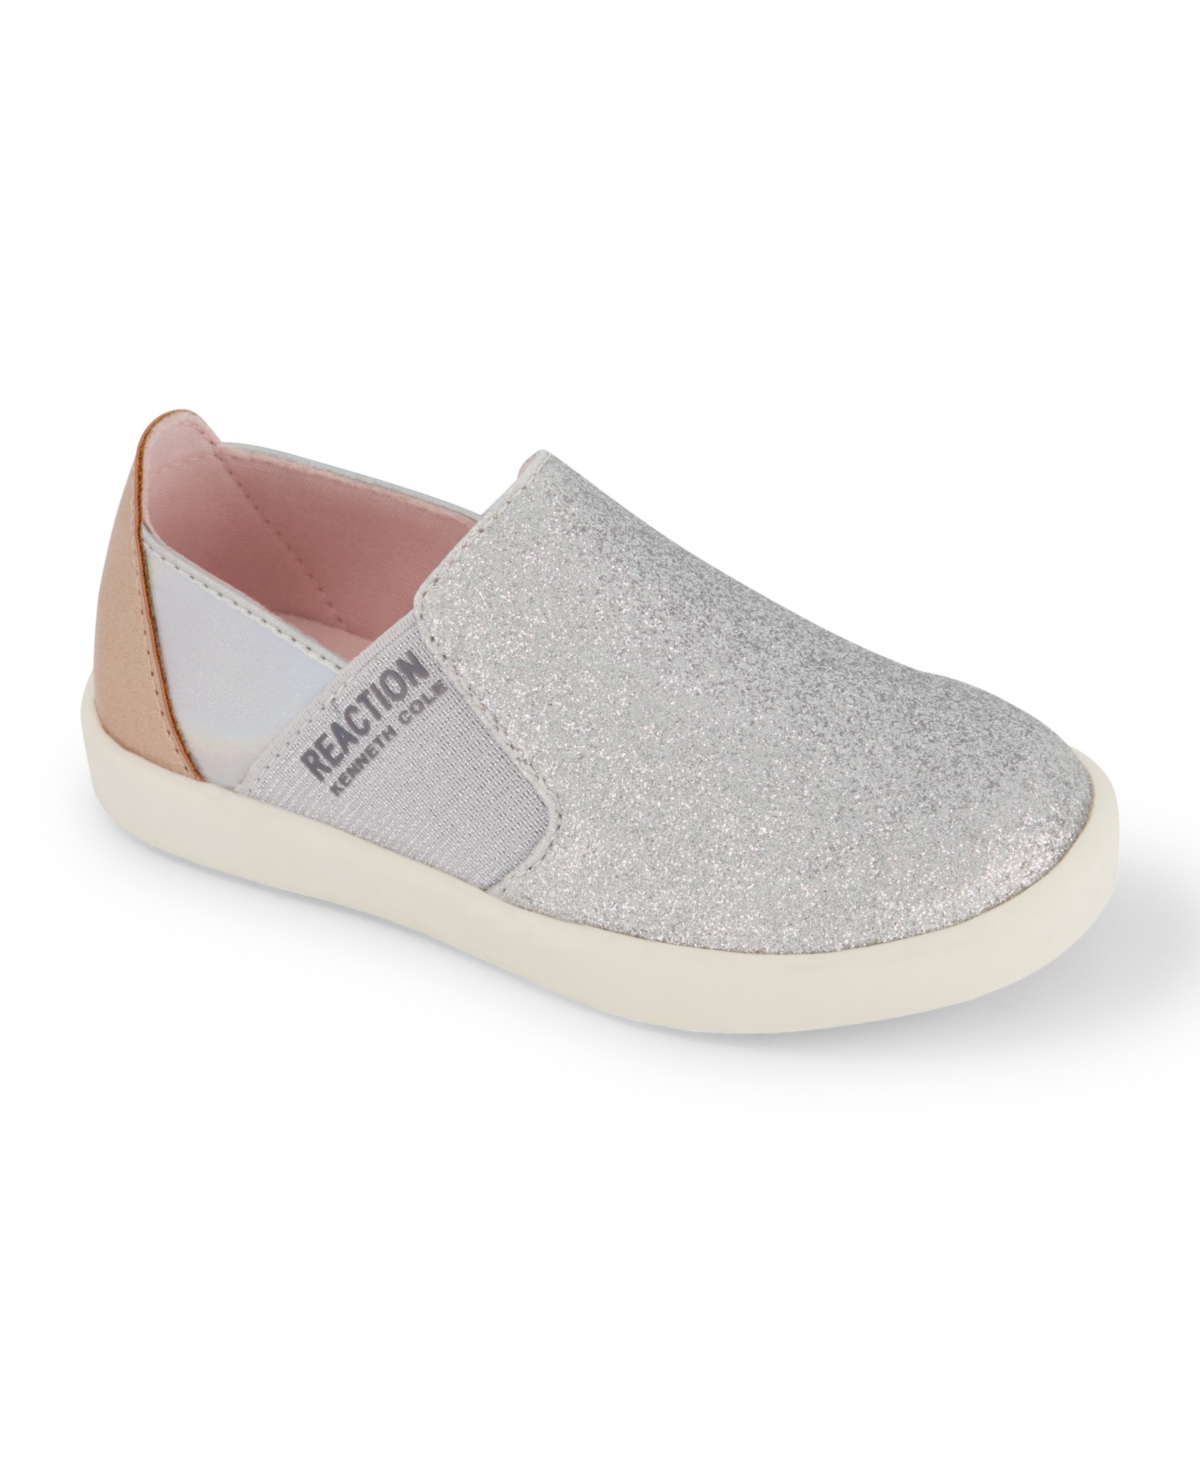 Kenneth Cole New York Toddler Girls Glitter Slip On Sneakers In Silver-tone